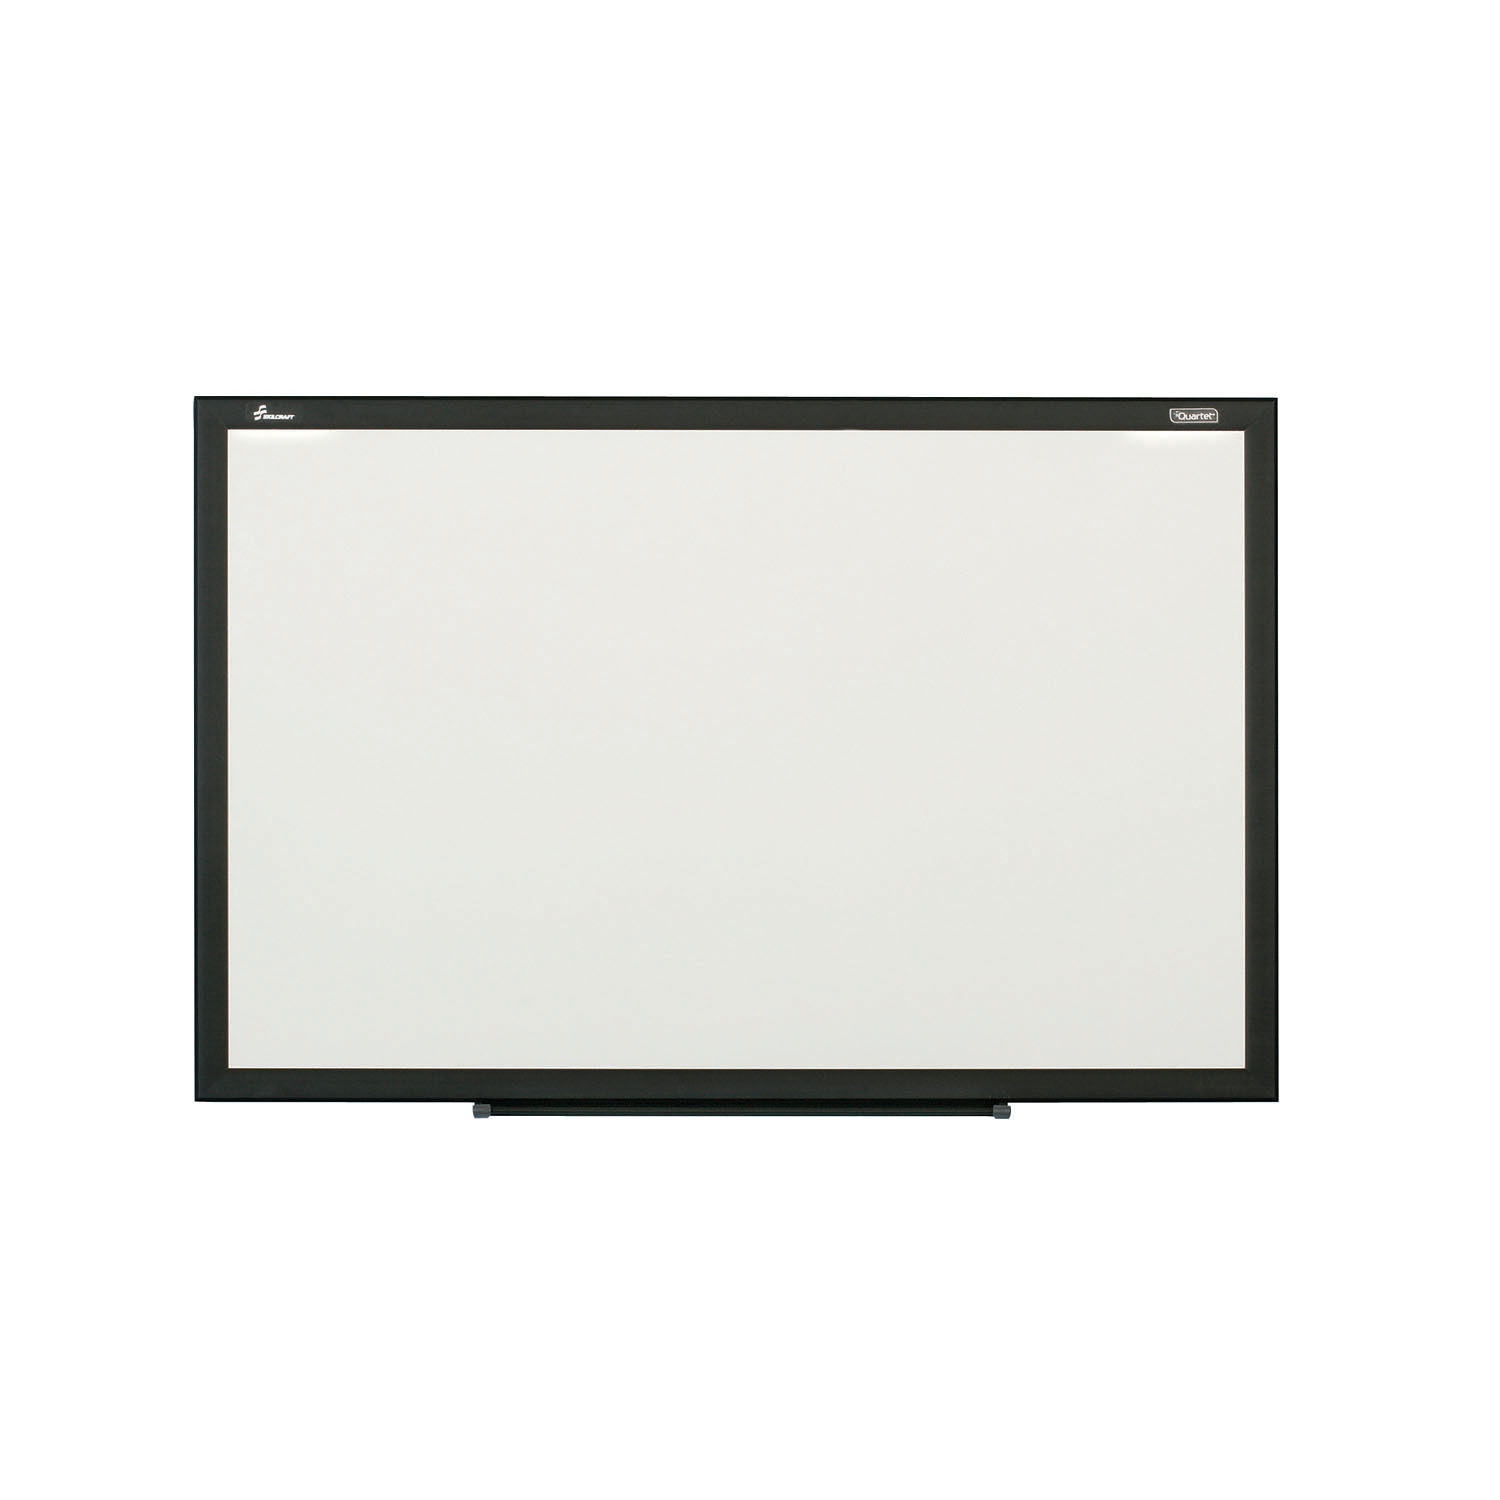 Dry Erase Whiteboard, Magnetic Painted Steel Surface, Brushed Silver Aluminum Frame, 3 x 2